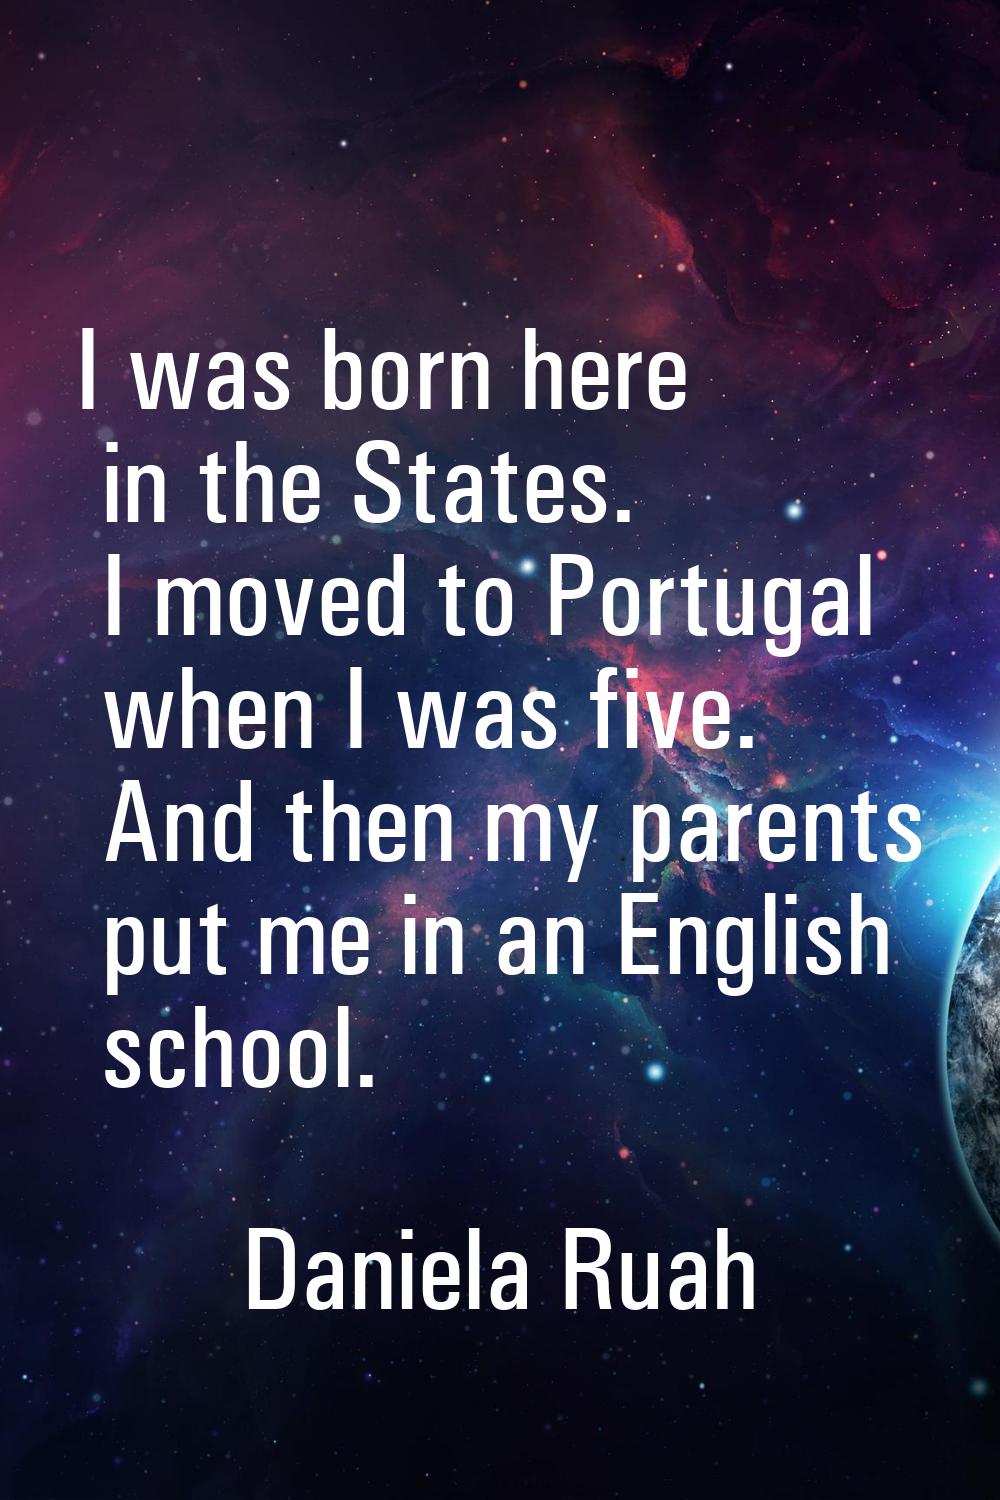 I was born here in the States. I moved to Portugal when I was five. And then my parents put me in a